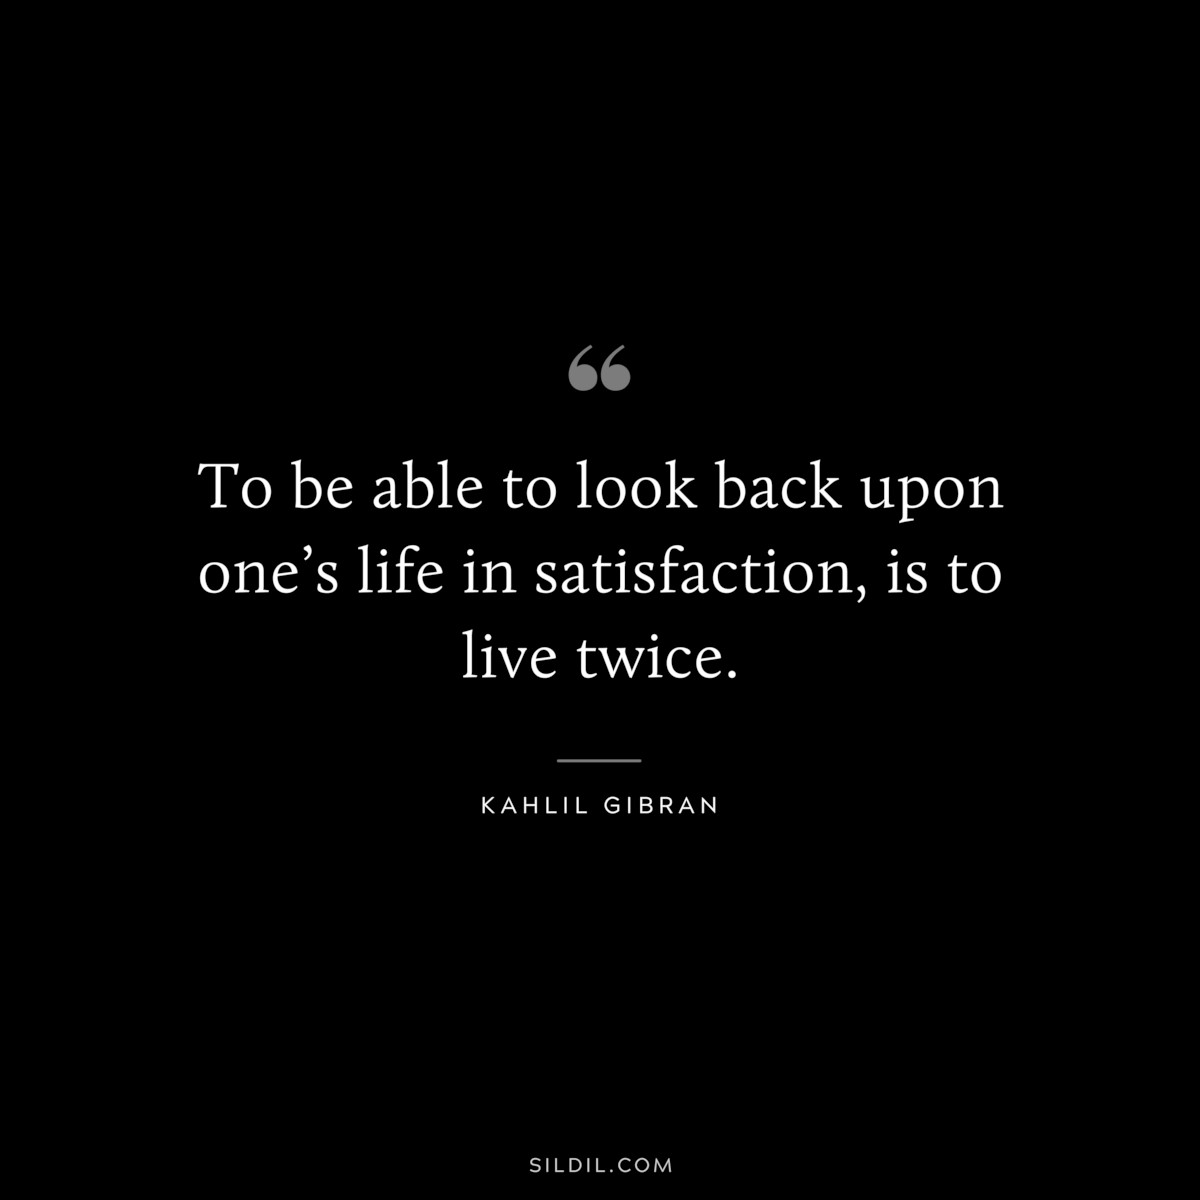 To be able to look back upon one’s life in satisfaction, is to live twice. ― Kahlil Gibran